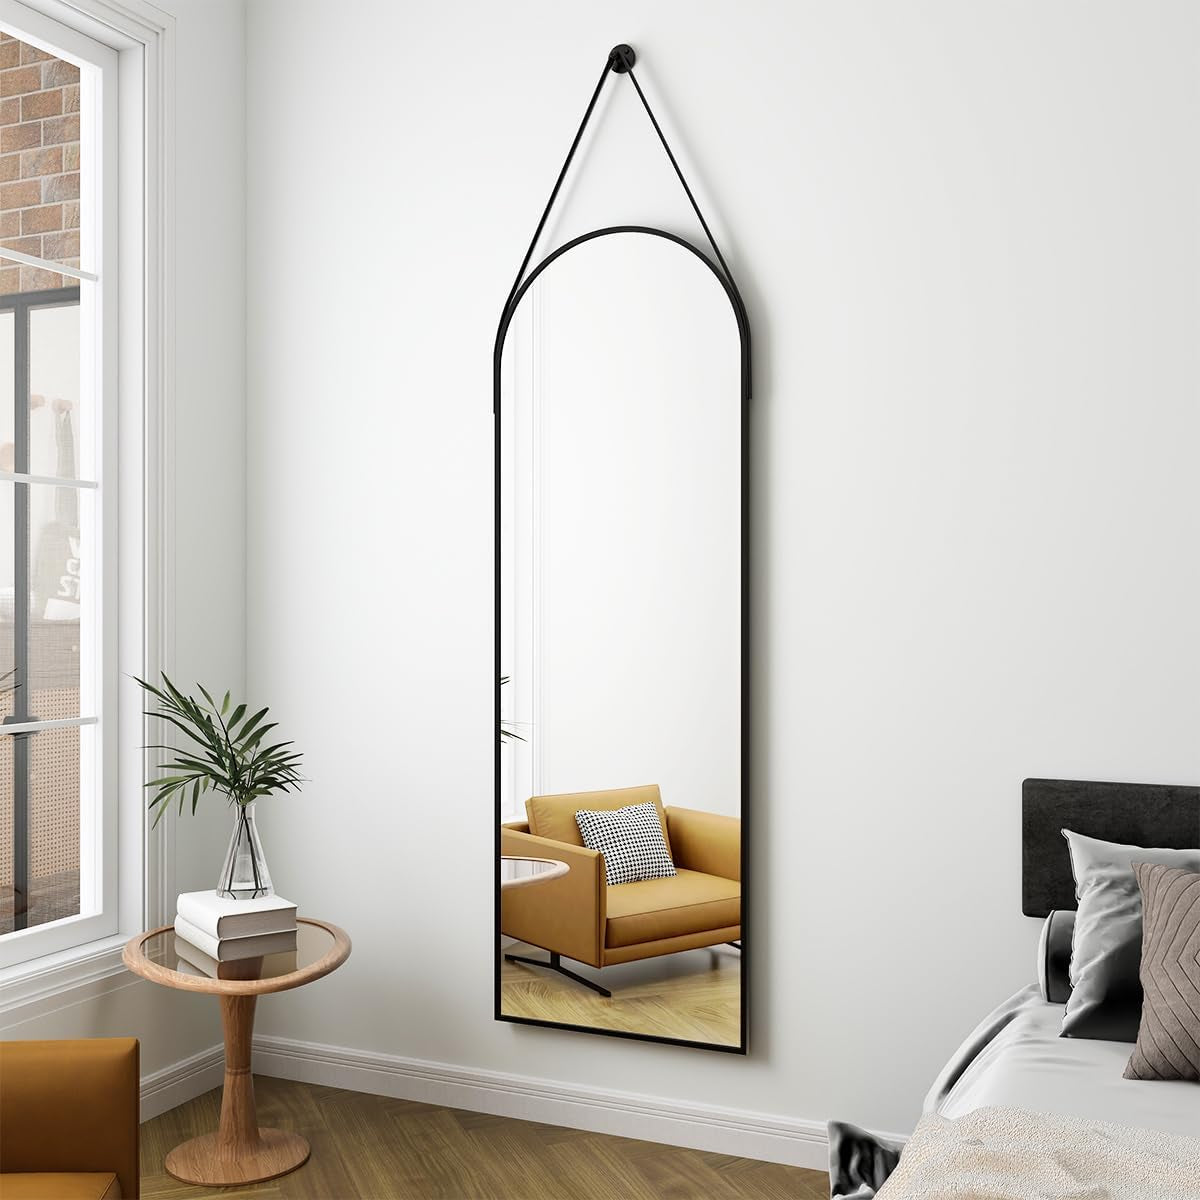 48'X16' Arched Wall Mirror with Hanging Mirror Leather Cord, Aluminum Frame - Wall-Mounted Hanging Mirror for Bathroom Vanity, Living Room, Bedroom, and Entryway Decor